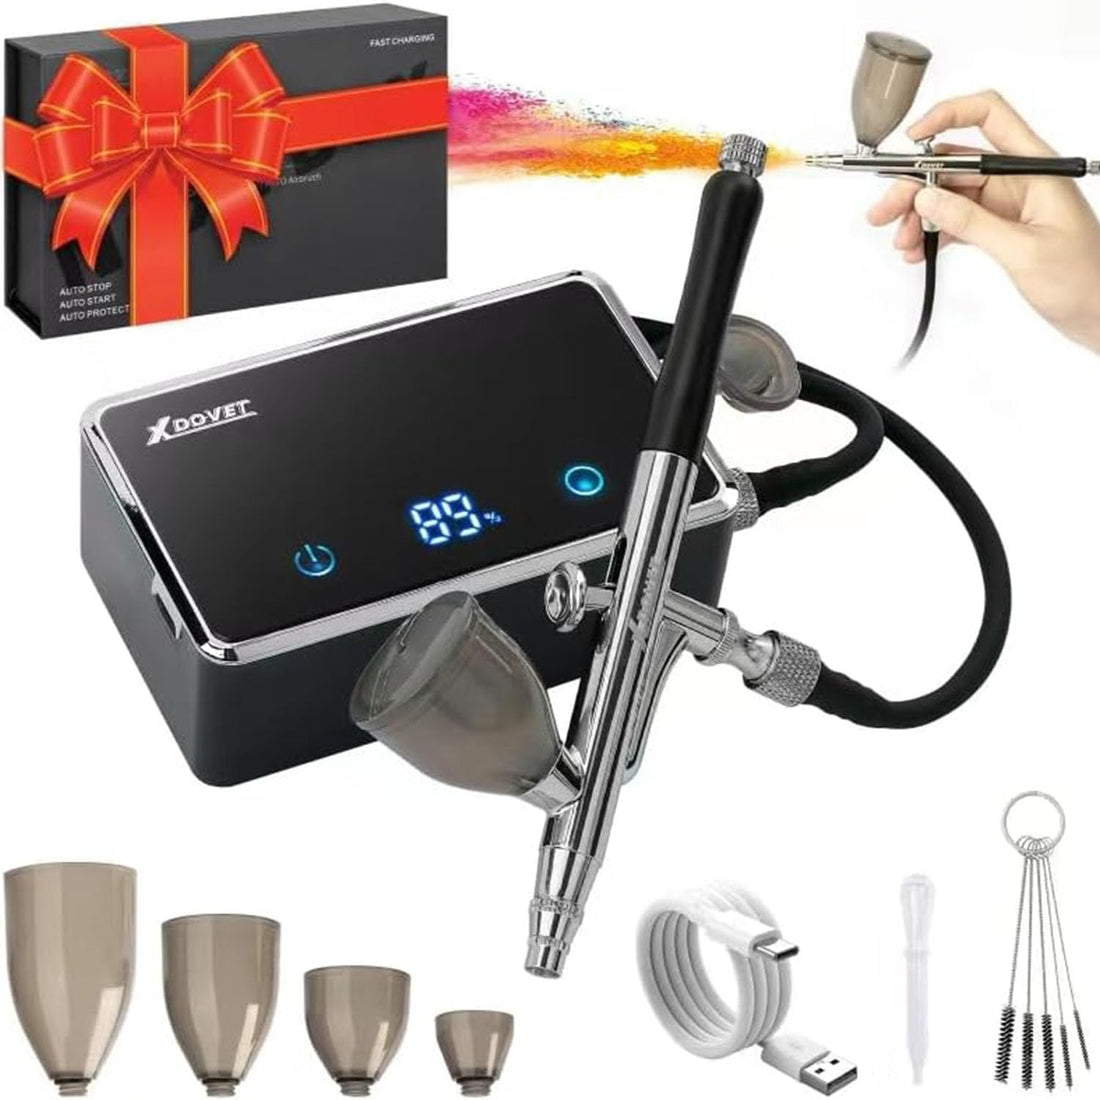 XDOVET Upgraded 32PSI Airbrush Kit, Rechargeable Multi-Function Dual-Action Airbrush Set with Compressor for Painting Portable Air Brush Set for Makeup, Cake Decor, Model Coloring, Nail Art, Tattoo